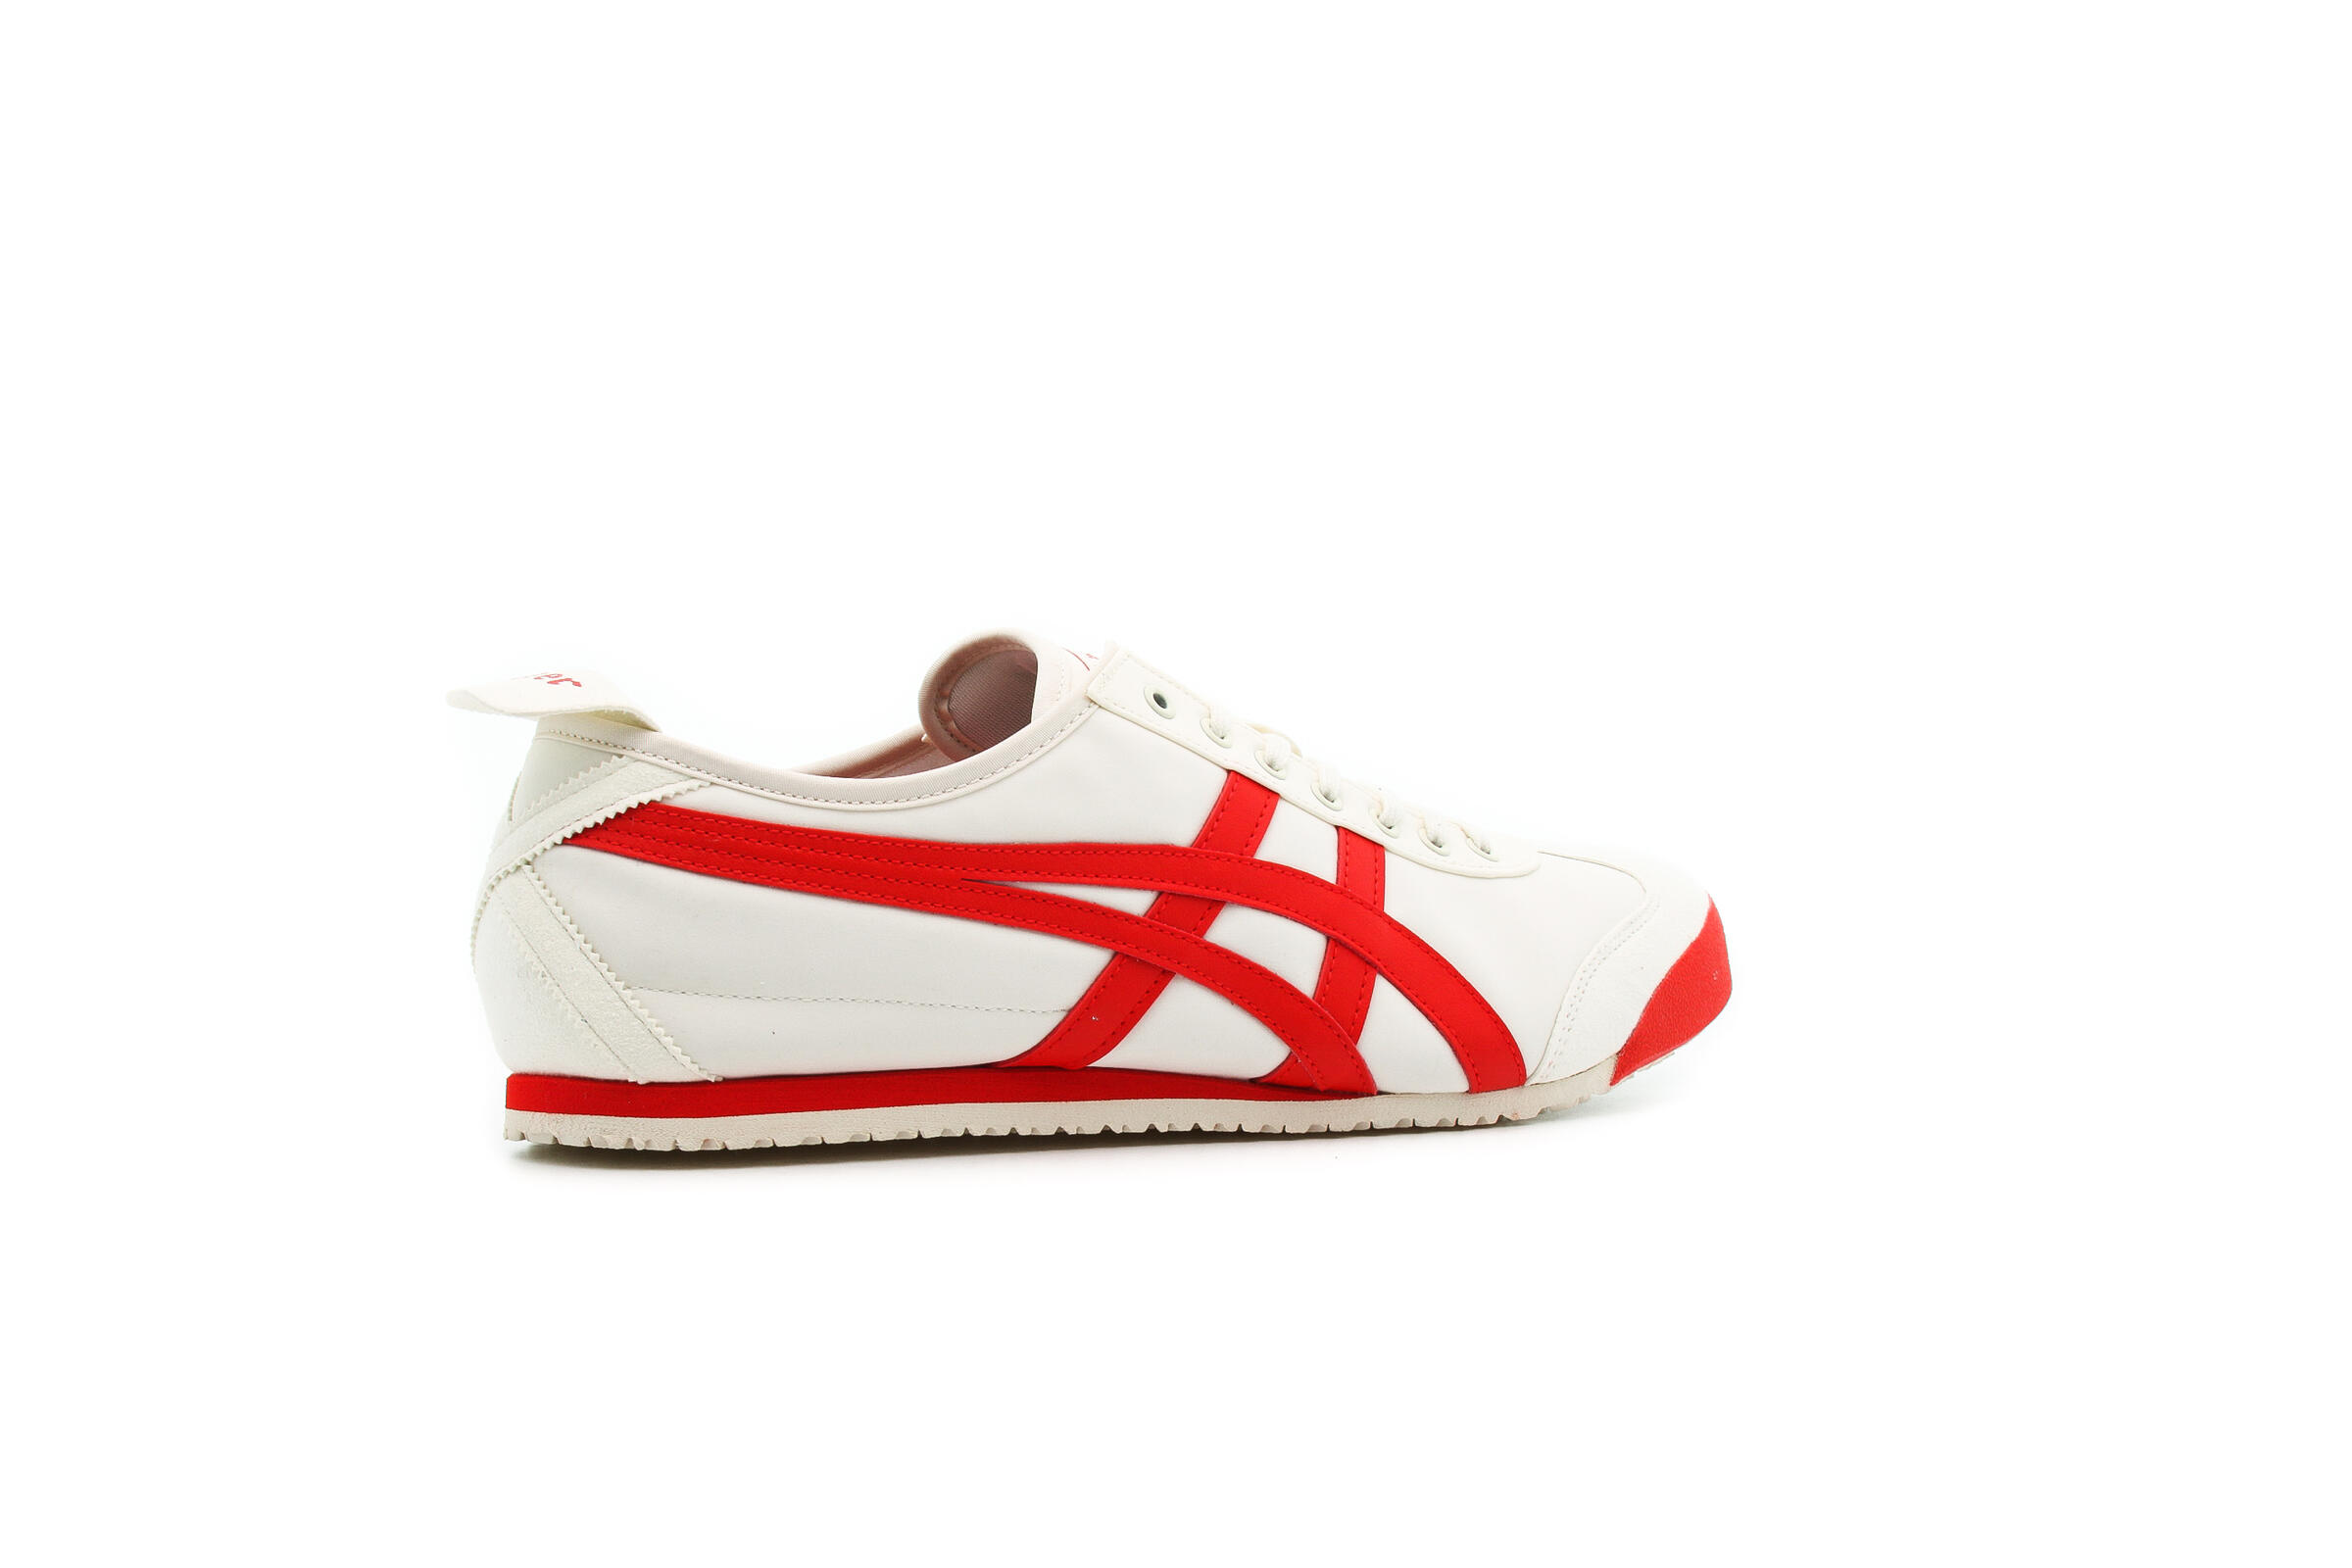 Onitsuka Tiger MEXICO 66 "FIERY RED"